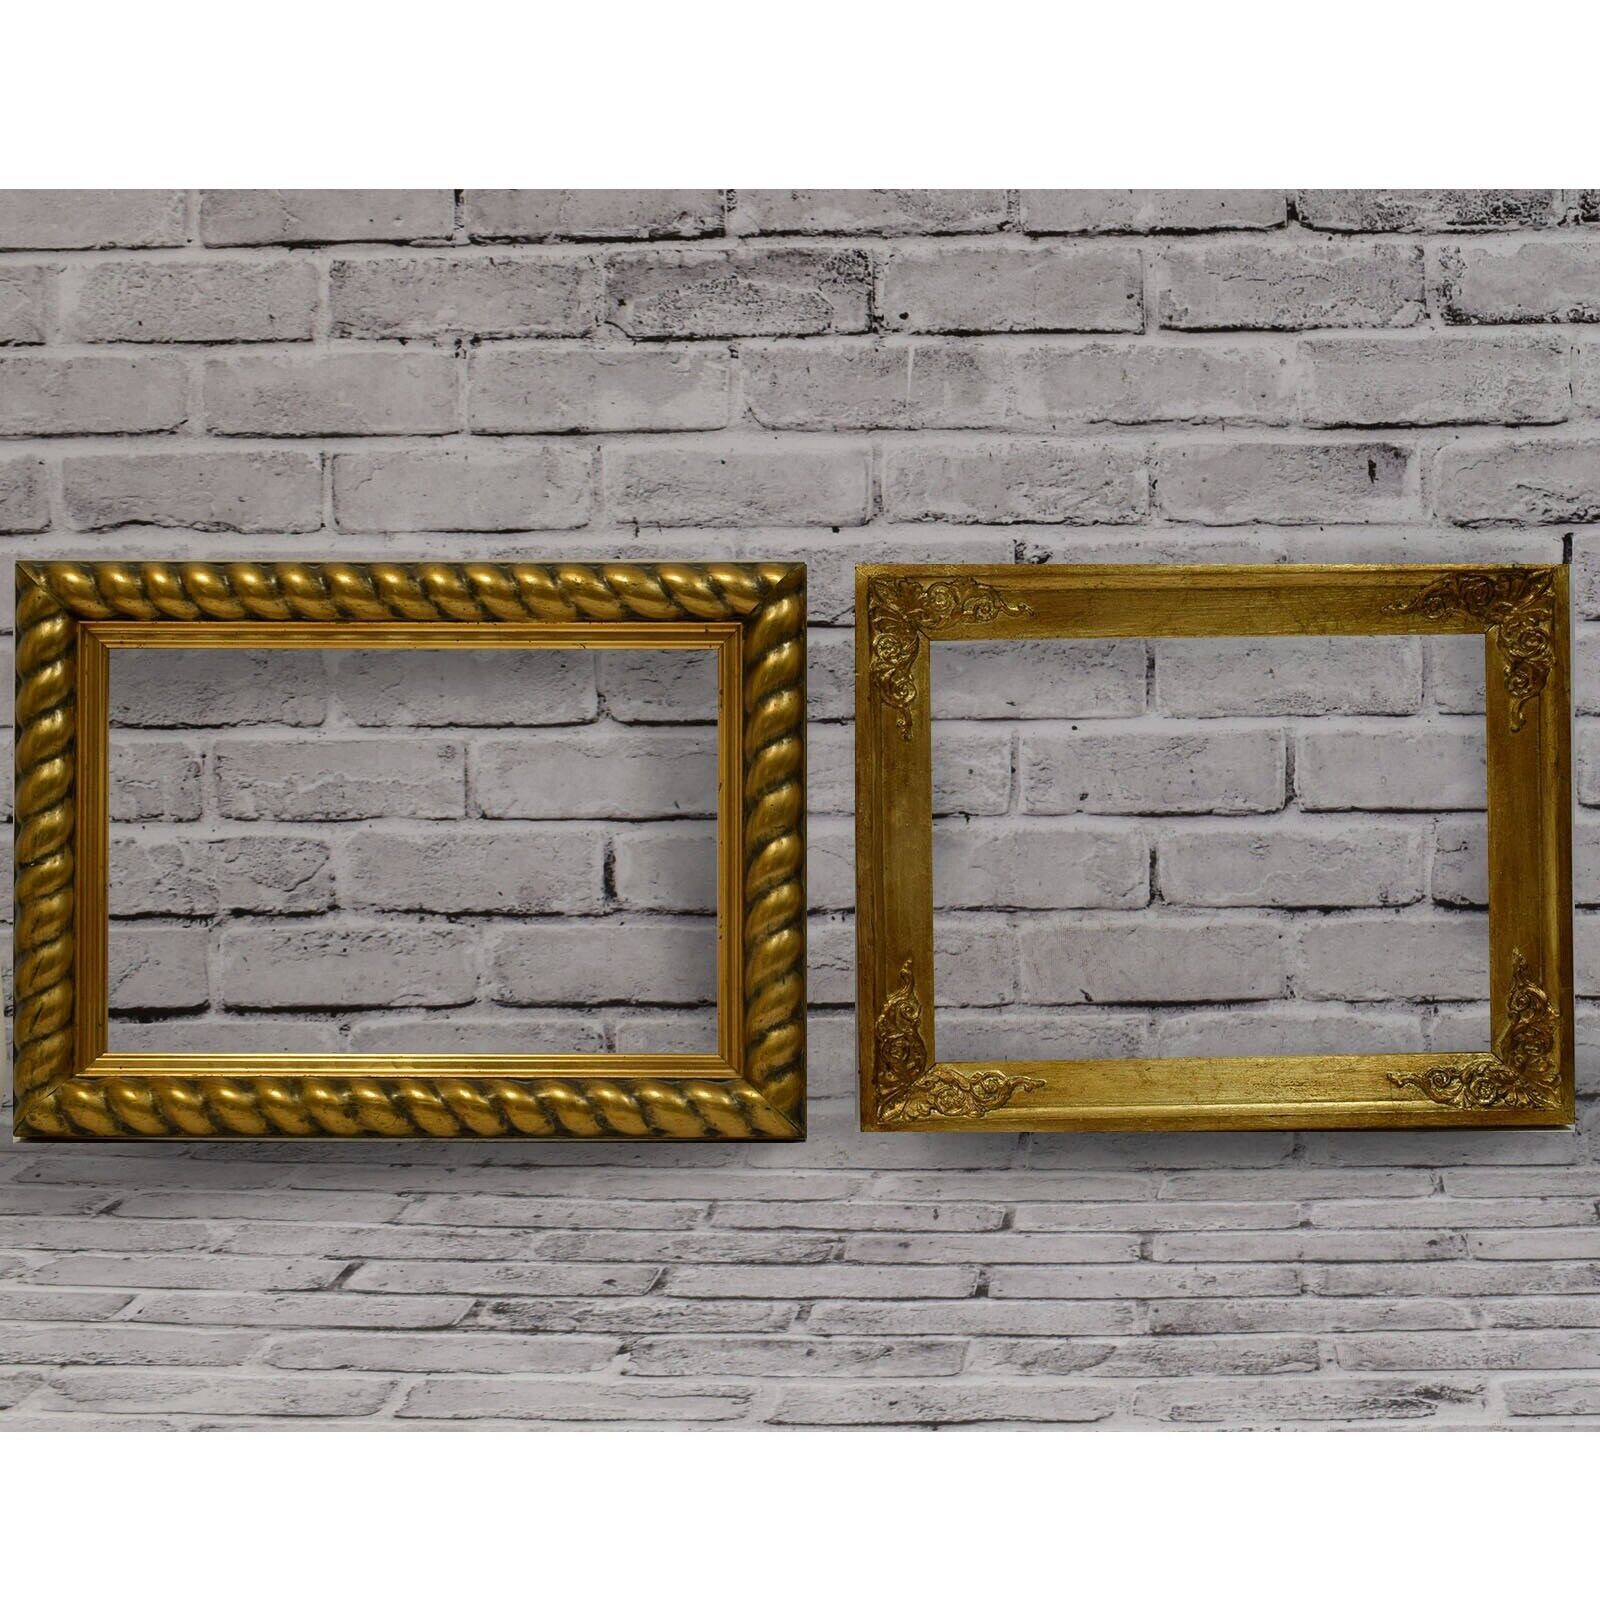 Ca. 1900-1920 Set of 2 Old  wooden frames dimensions: 17.9 x 12.6 in inside